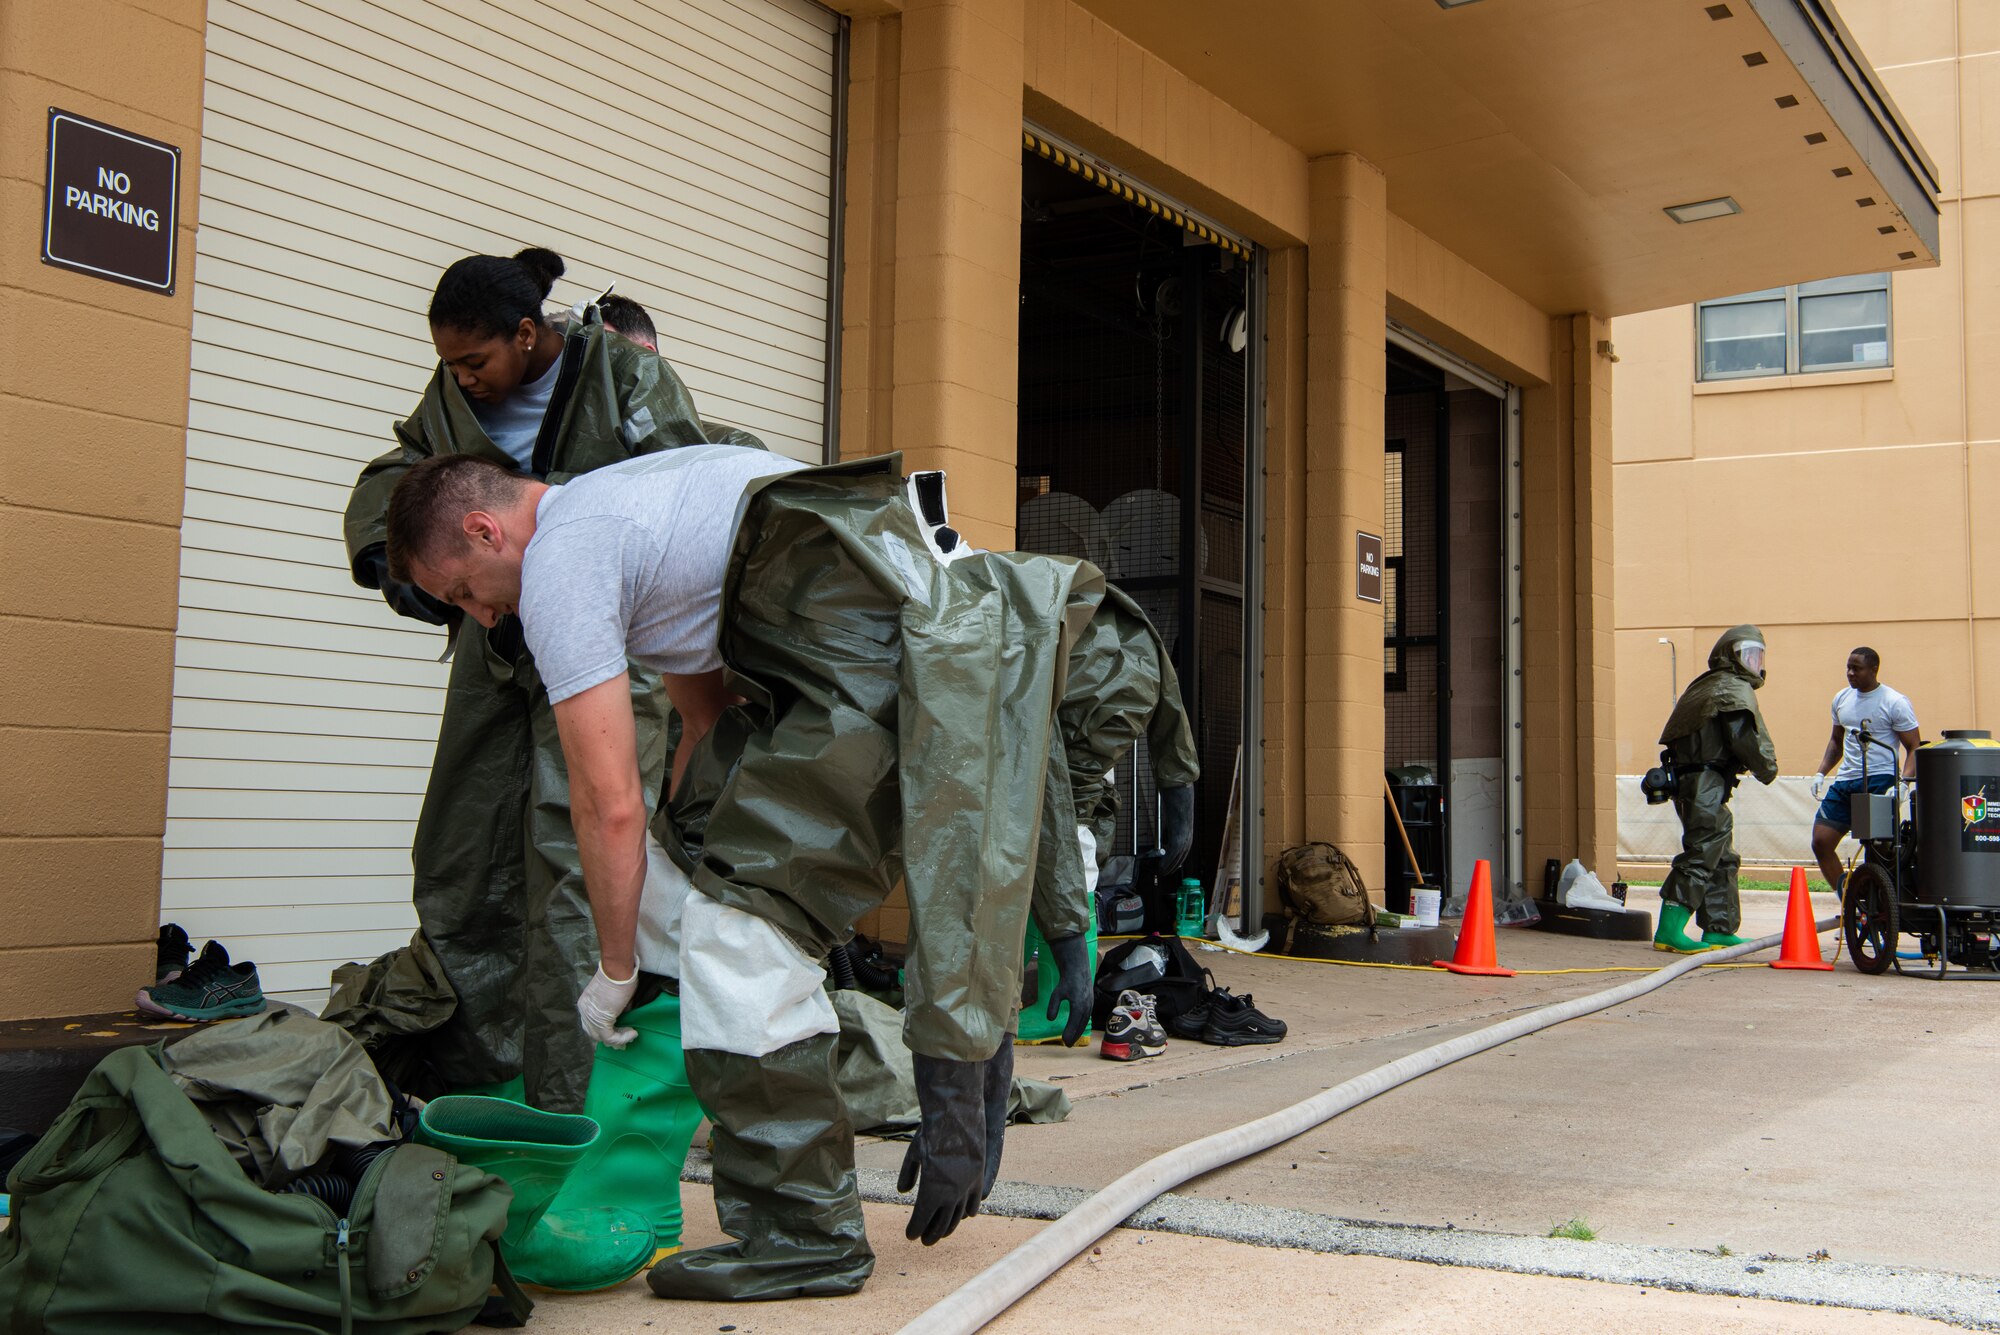 Airmen from the 7th Medical Group put on protective gear during a decontamination exercise at Dyess Air Force Base, Texas, June 1, 2023. The exercise required the completion of a three-day training course that tested Airmen’s medical disaster response. (U.S. Air Force photo by Airman 1st Class Alondra Cristobal Hernandez)